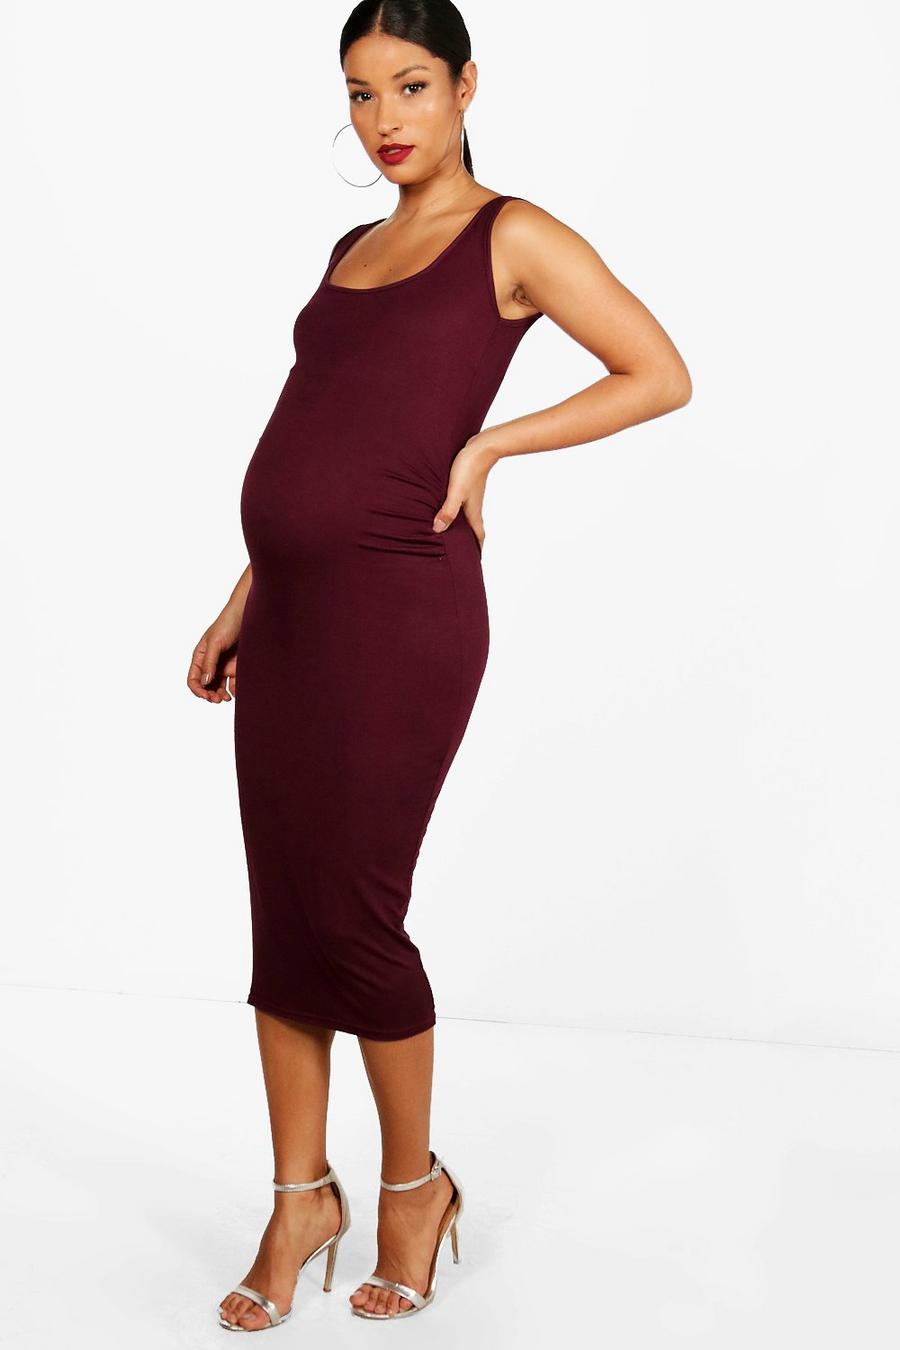 Berry red Maternity Bodycon Dress